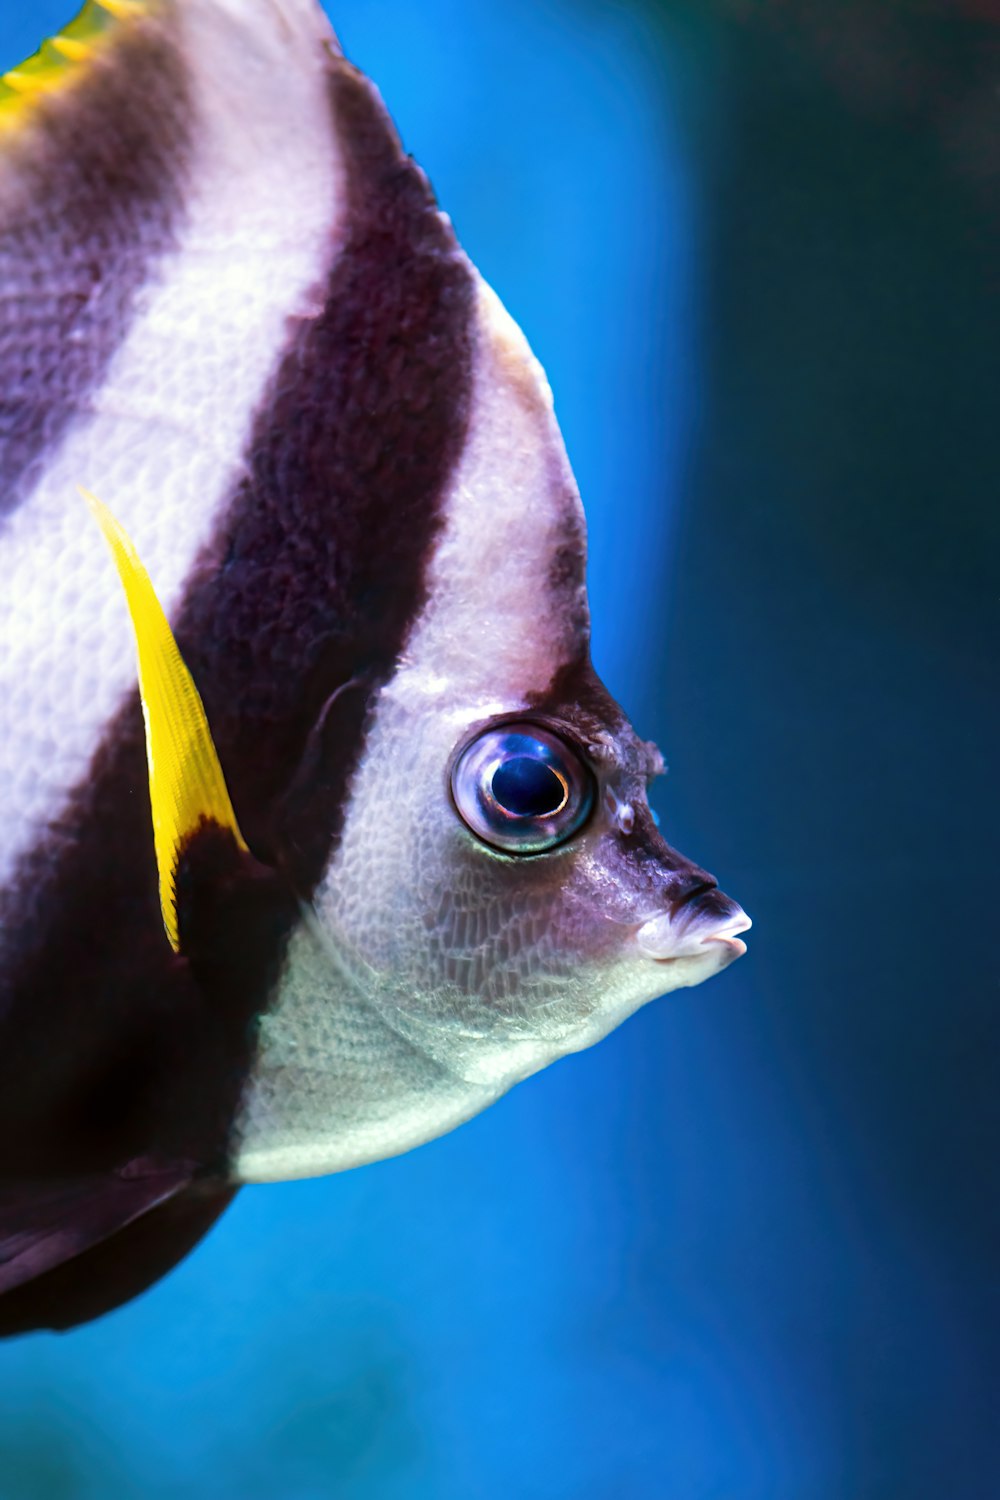 a close up of a fish with a blurry background